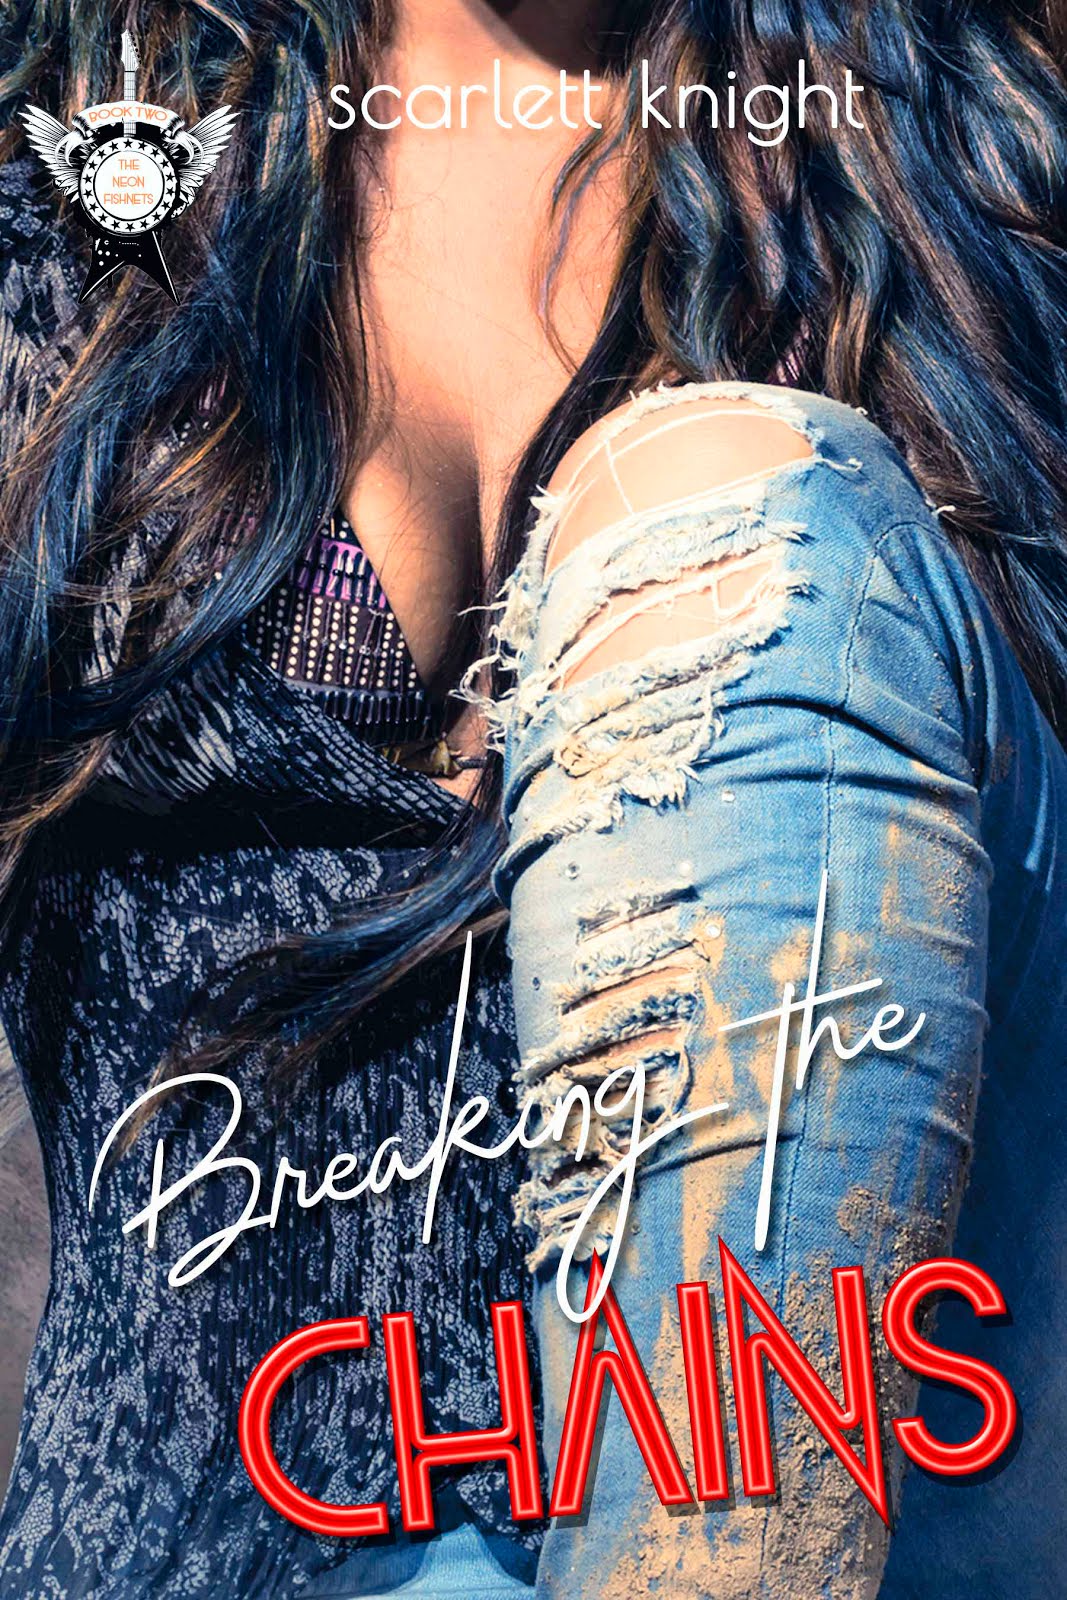 THE NEON FISHNETS BOOK 2: BREAKING THE CHAINS